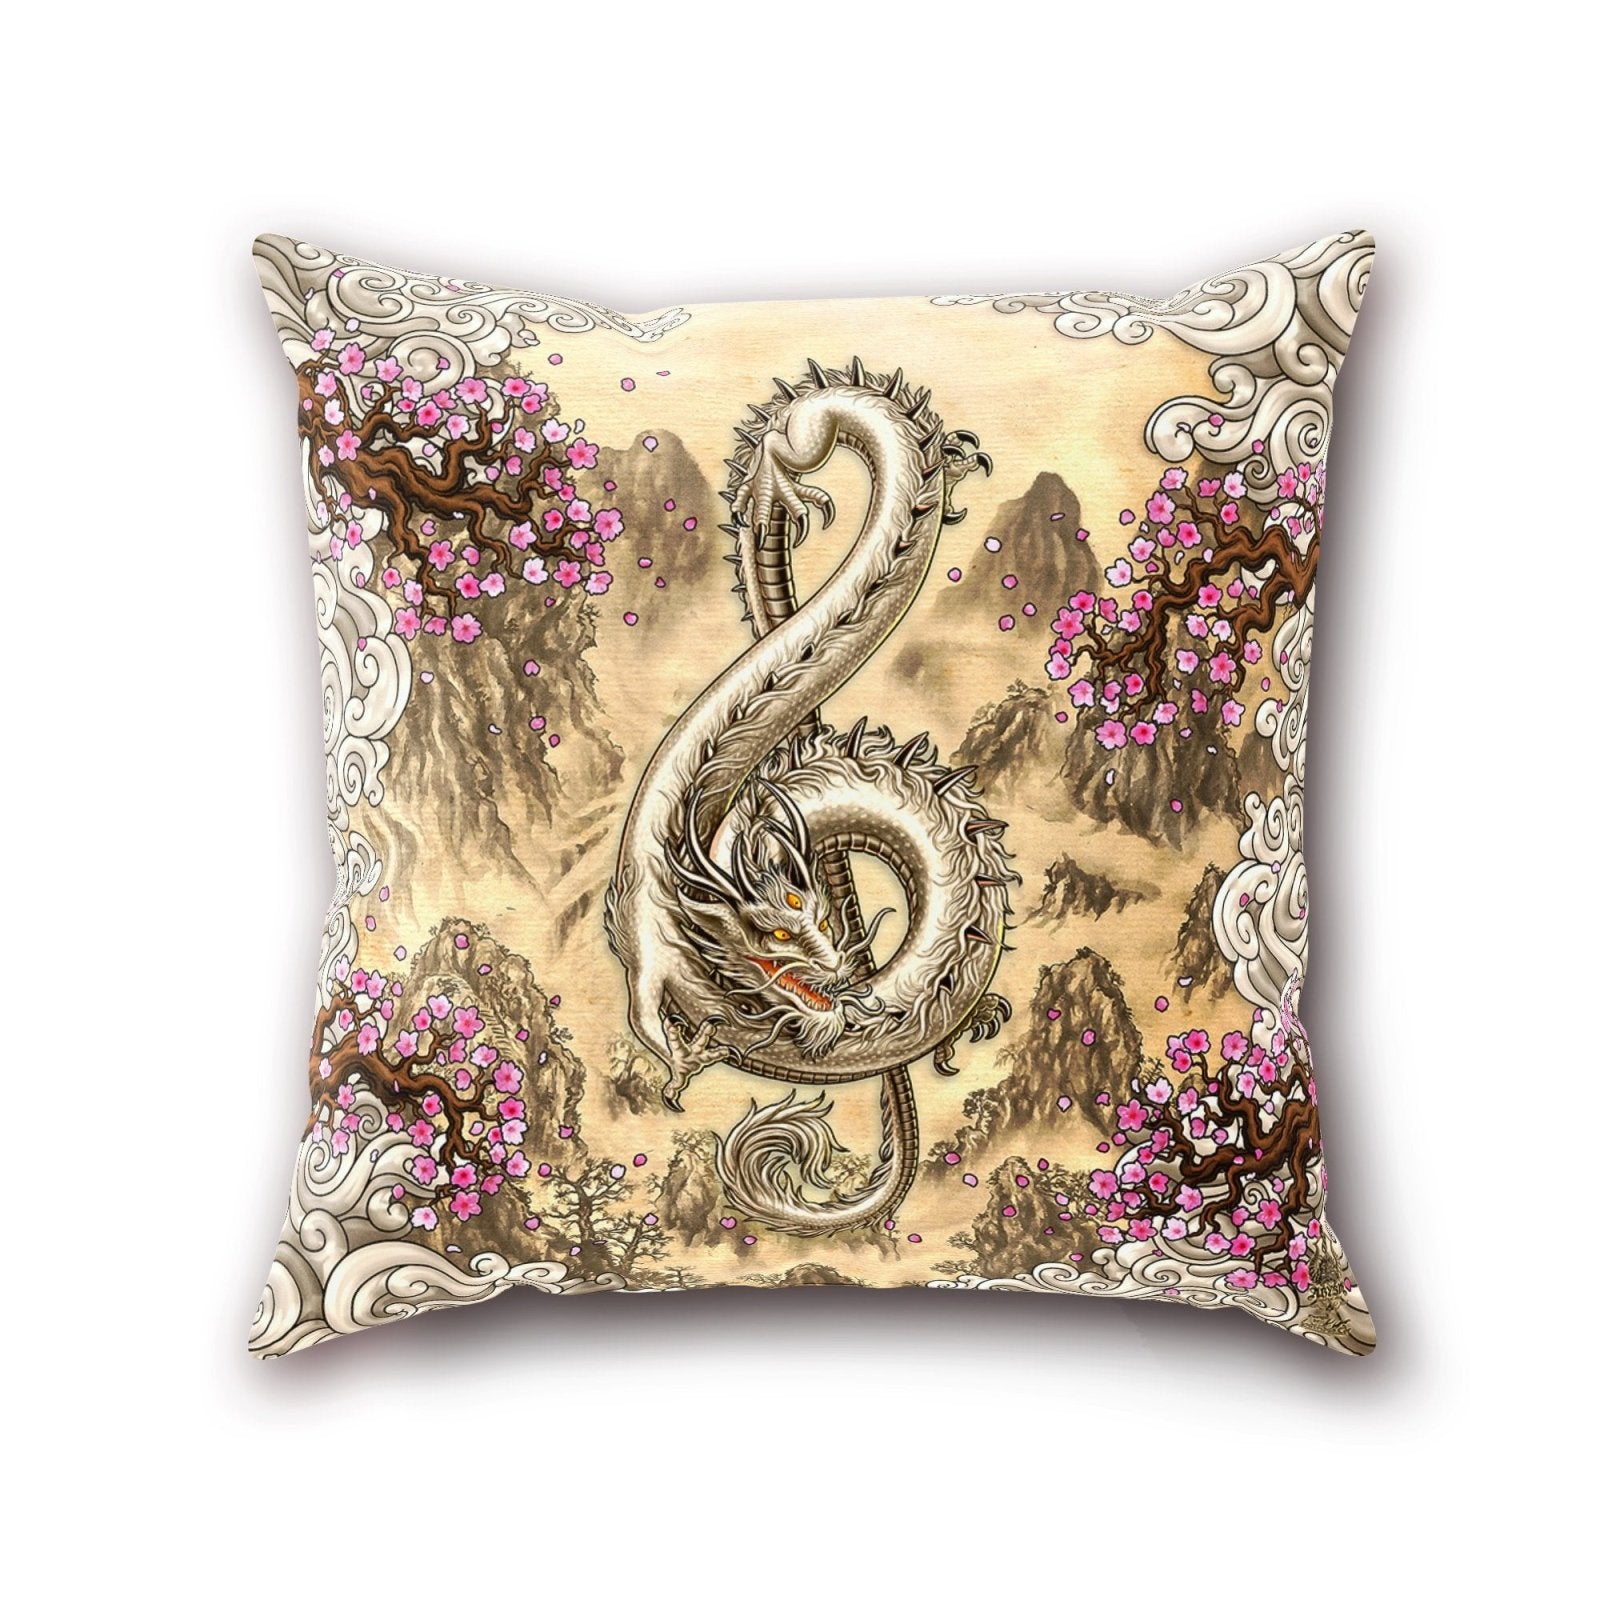 Chinese Dragon Throw Pillow, Decorative Accent Cushion, Music Room Decor, Funky and Eclectic Home - Treble Clef, Painting - Abysm Internal